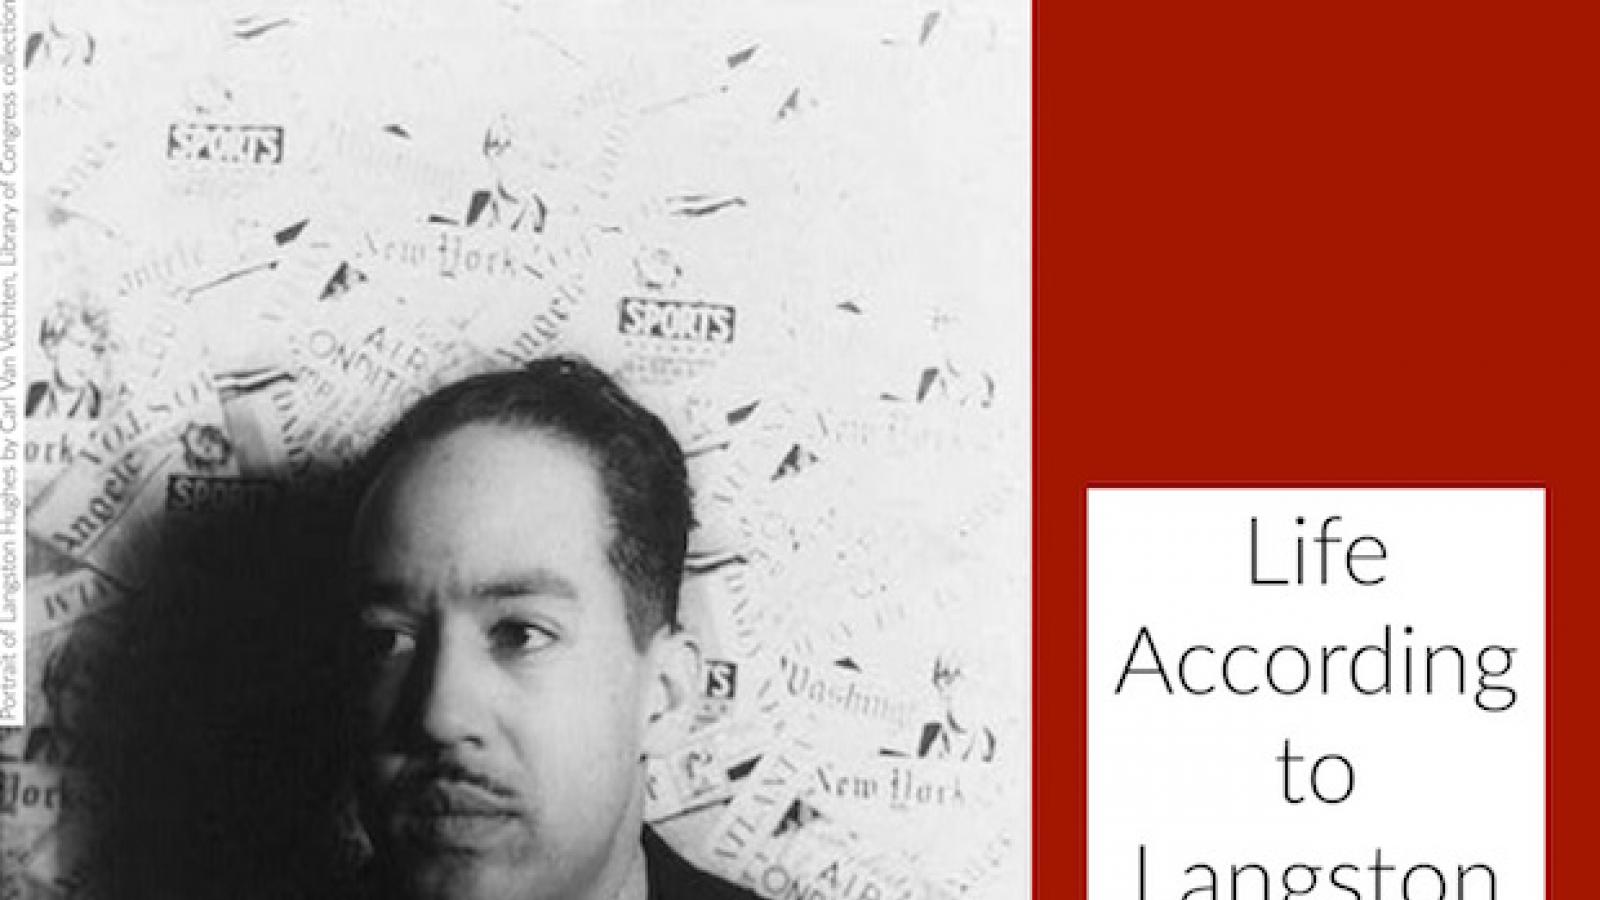 Carl Van Vechten black and white portrait of Langston Hughes with text Life According to Langston Hughes